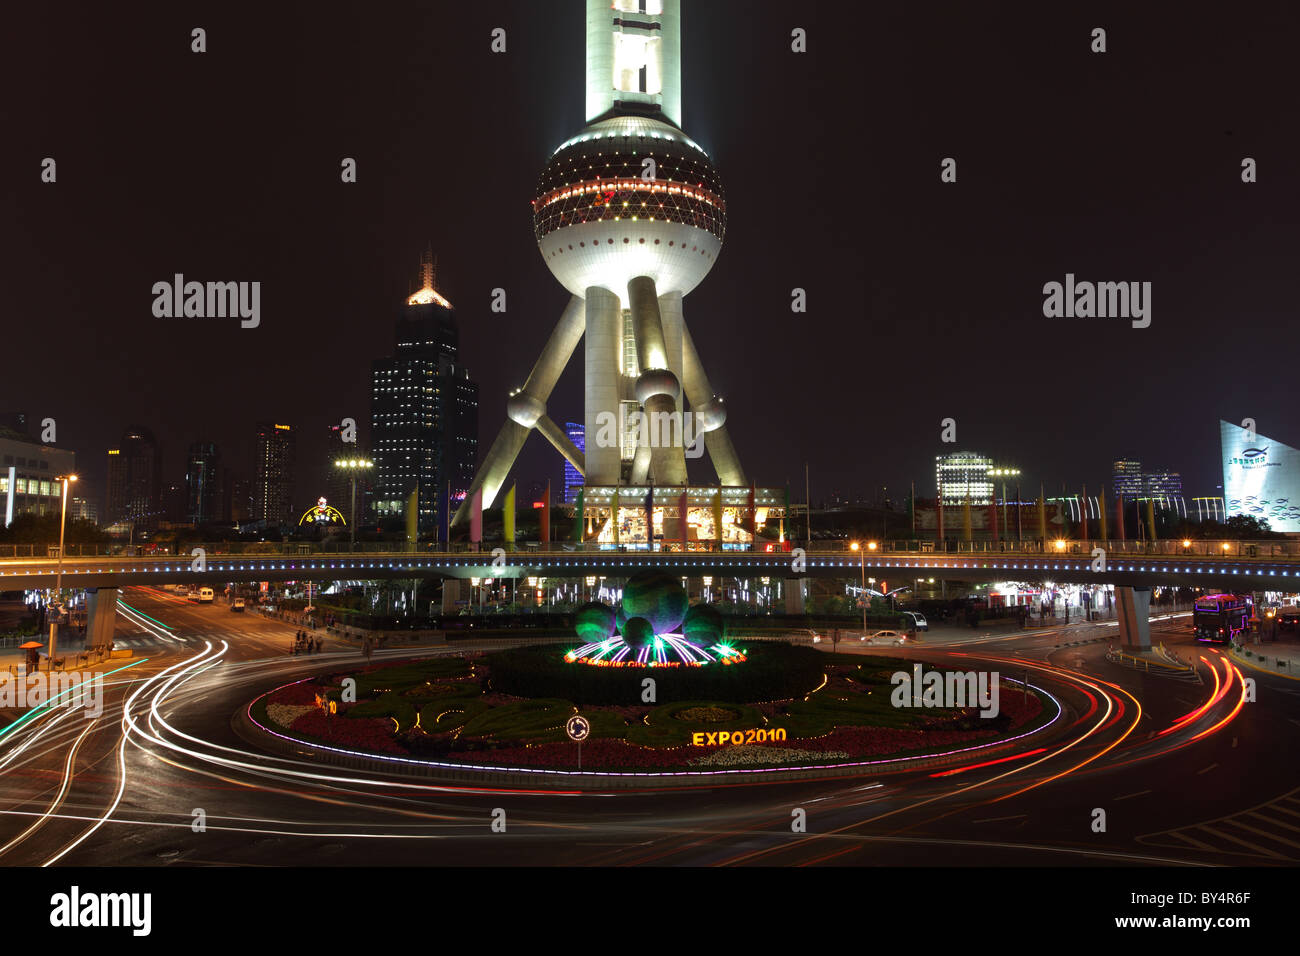 Oriental Pearl Tower Roundabout in Shanghai Pudong, China. Stock Photo